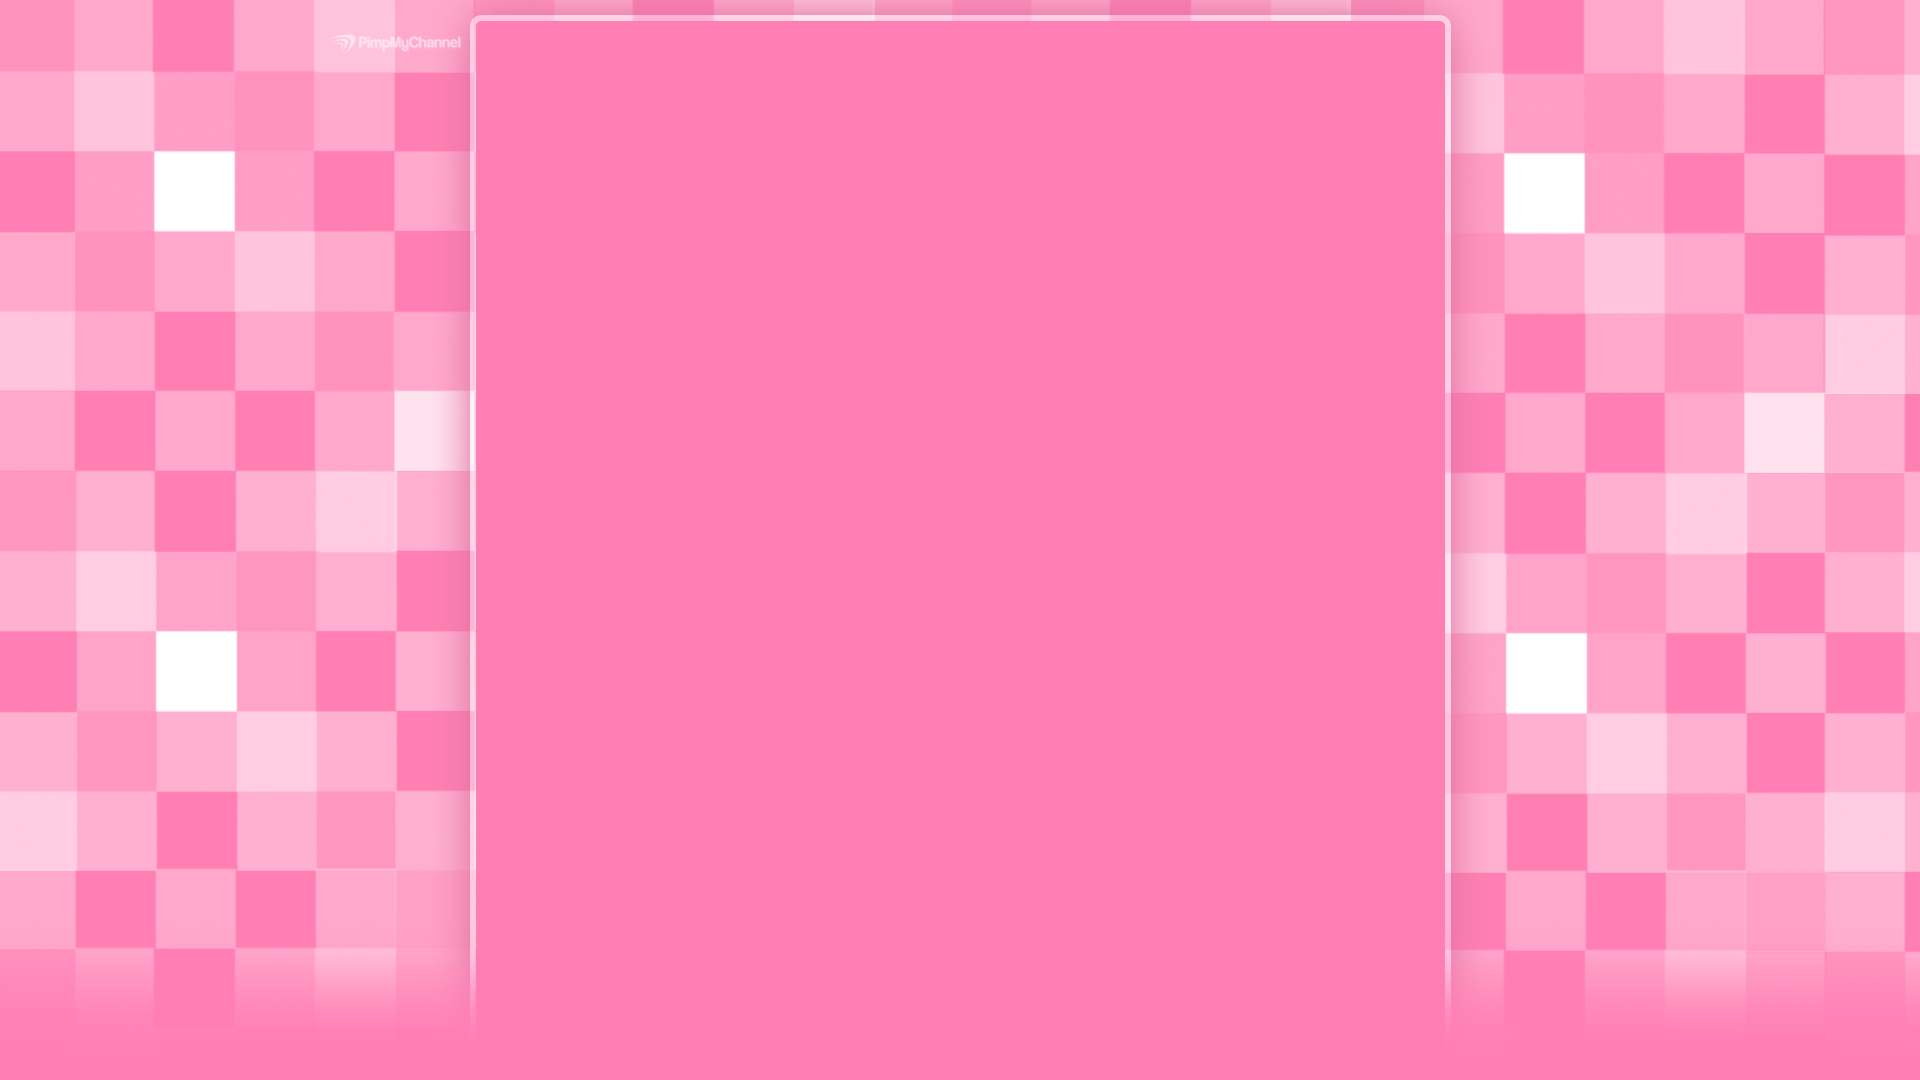 Background Background Cute Cutepinksquares Squares Pink Girly